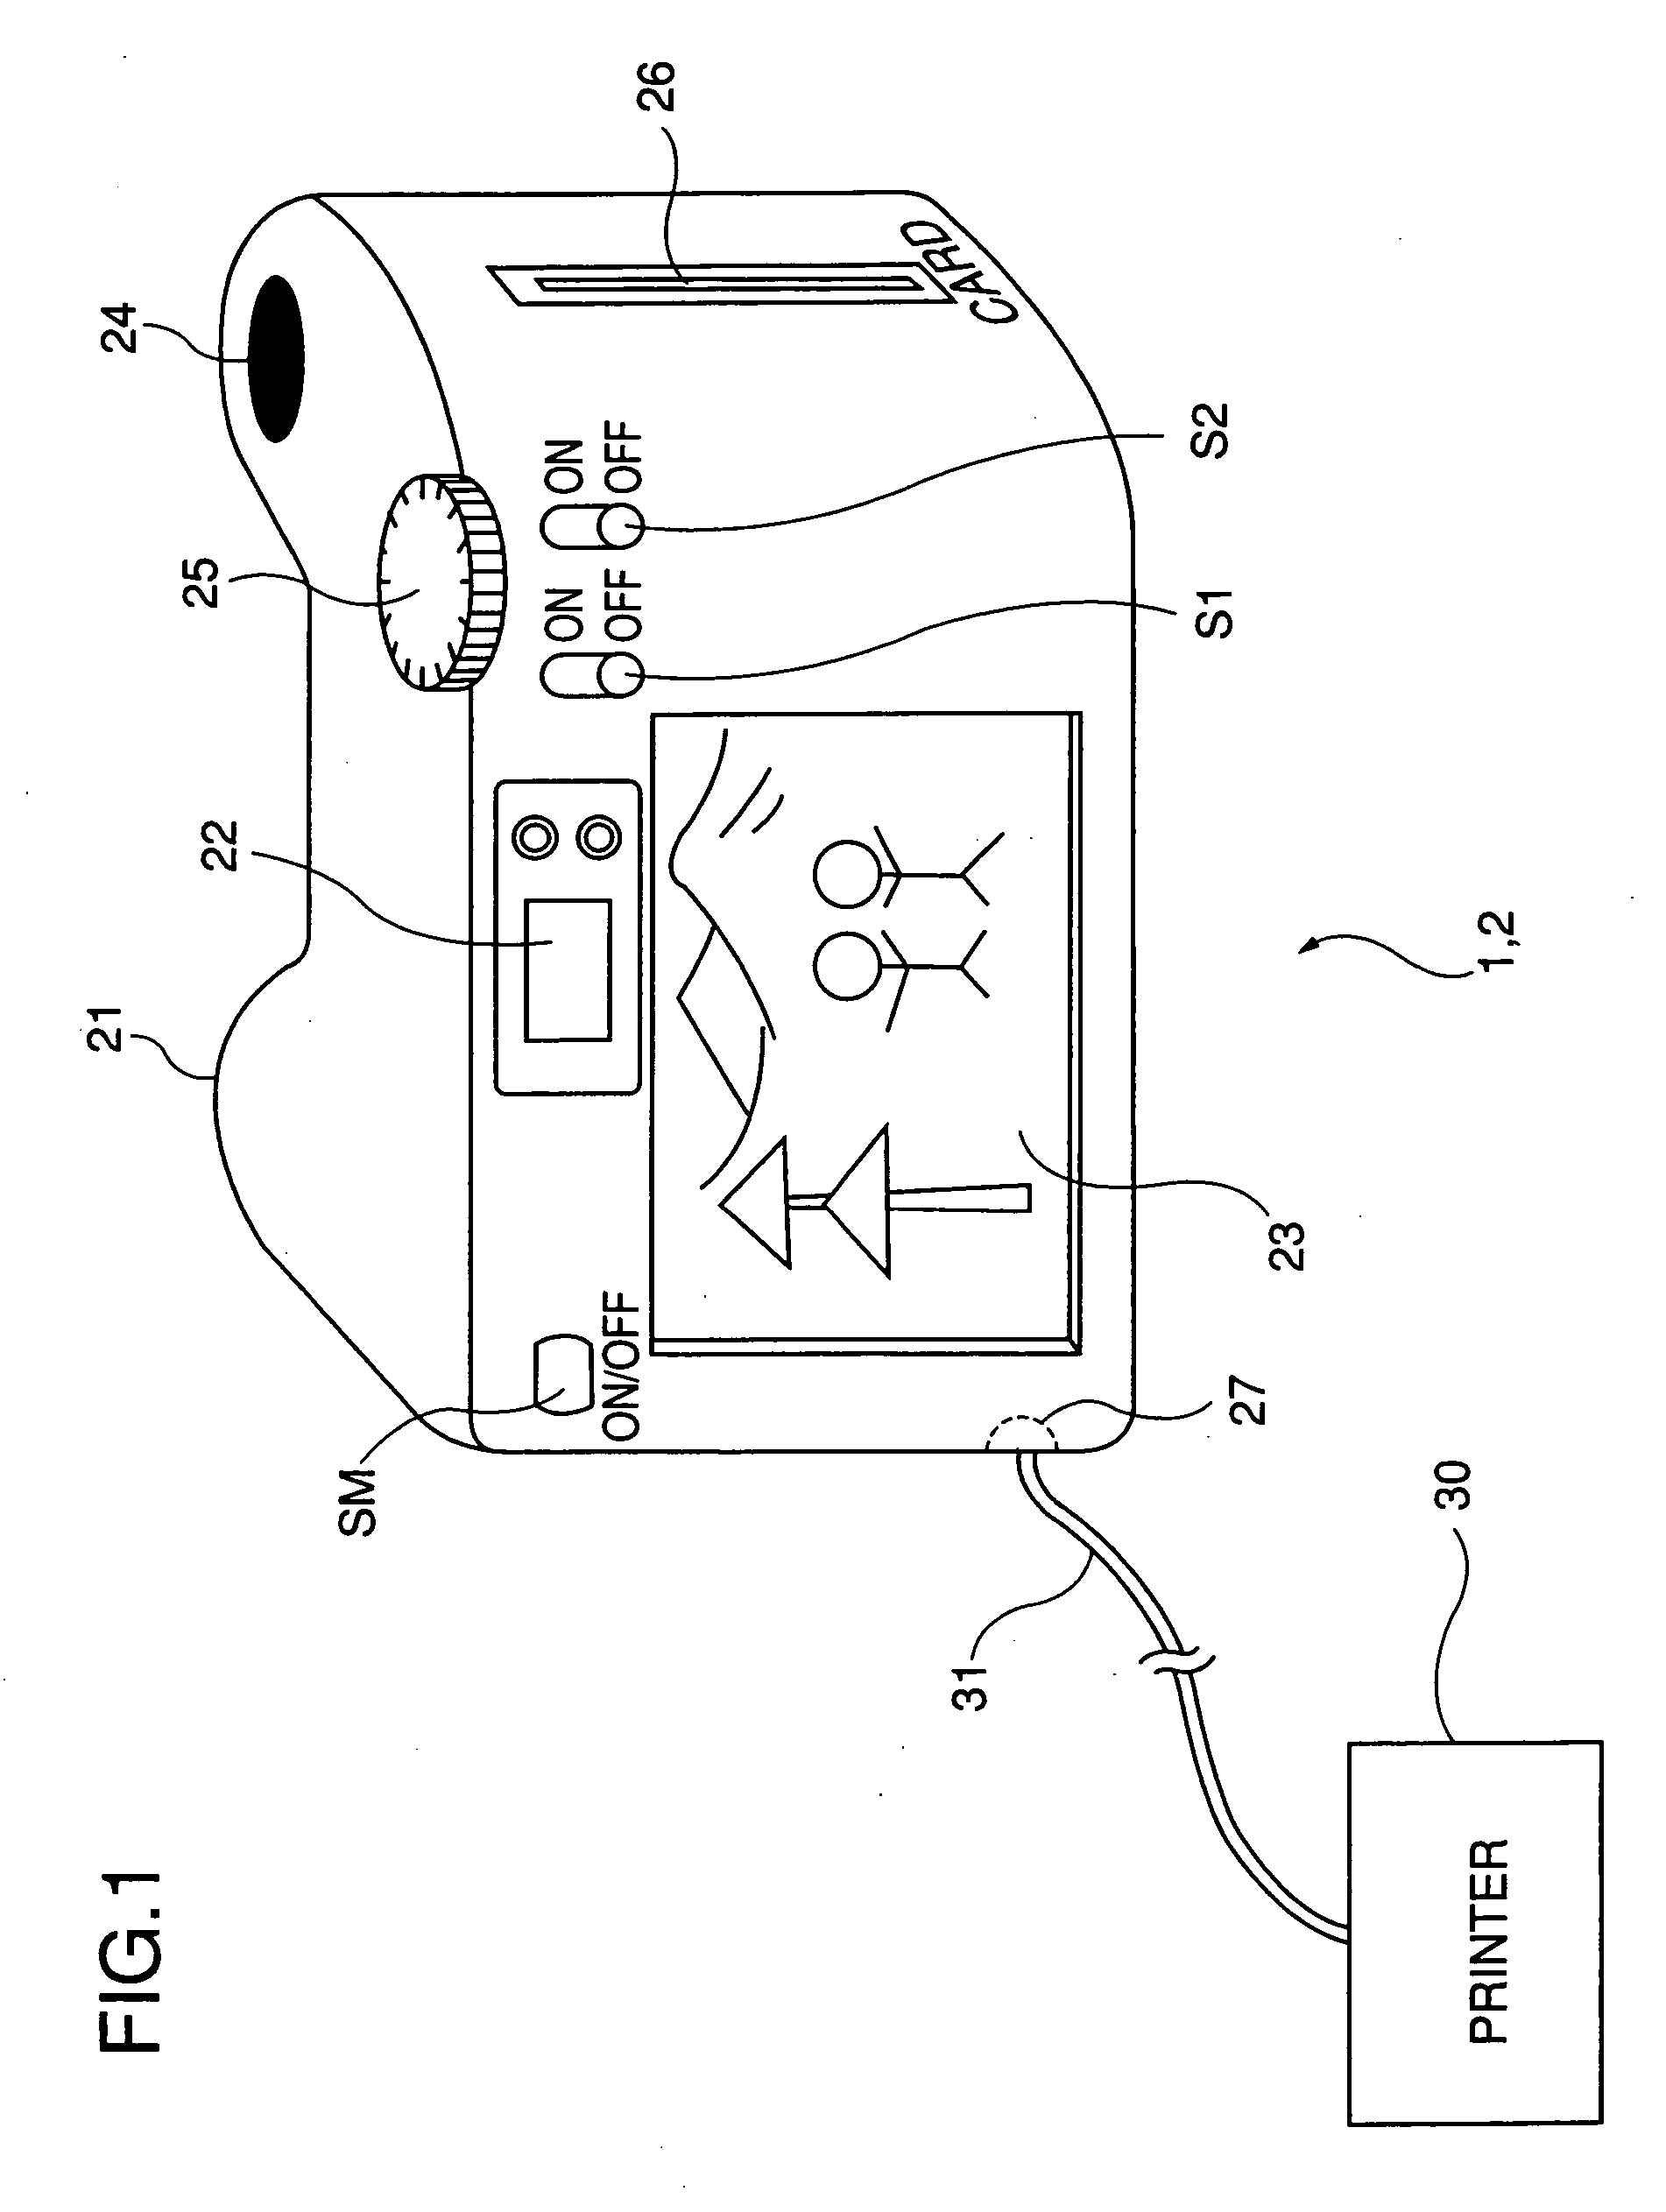 Digital camera with automatic operating mode selection